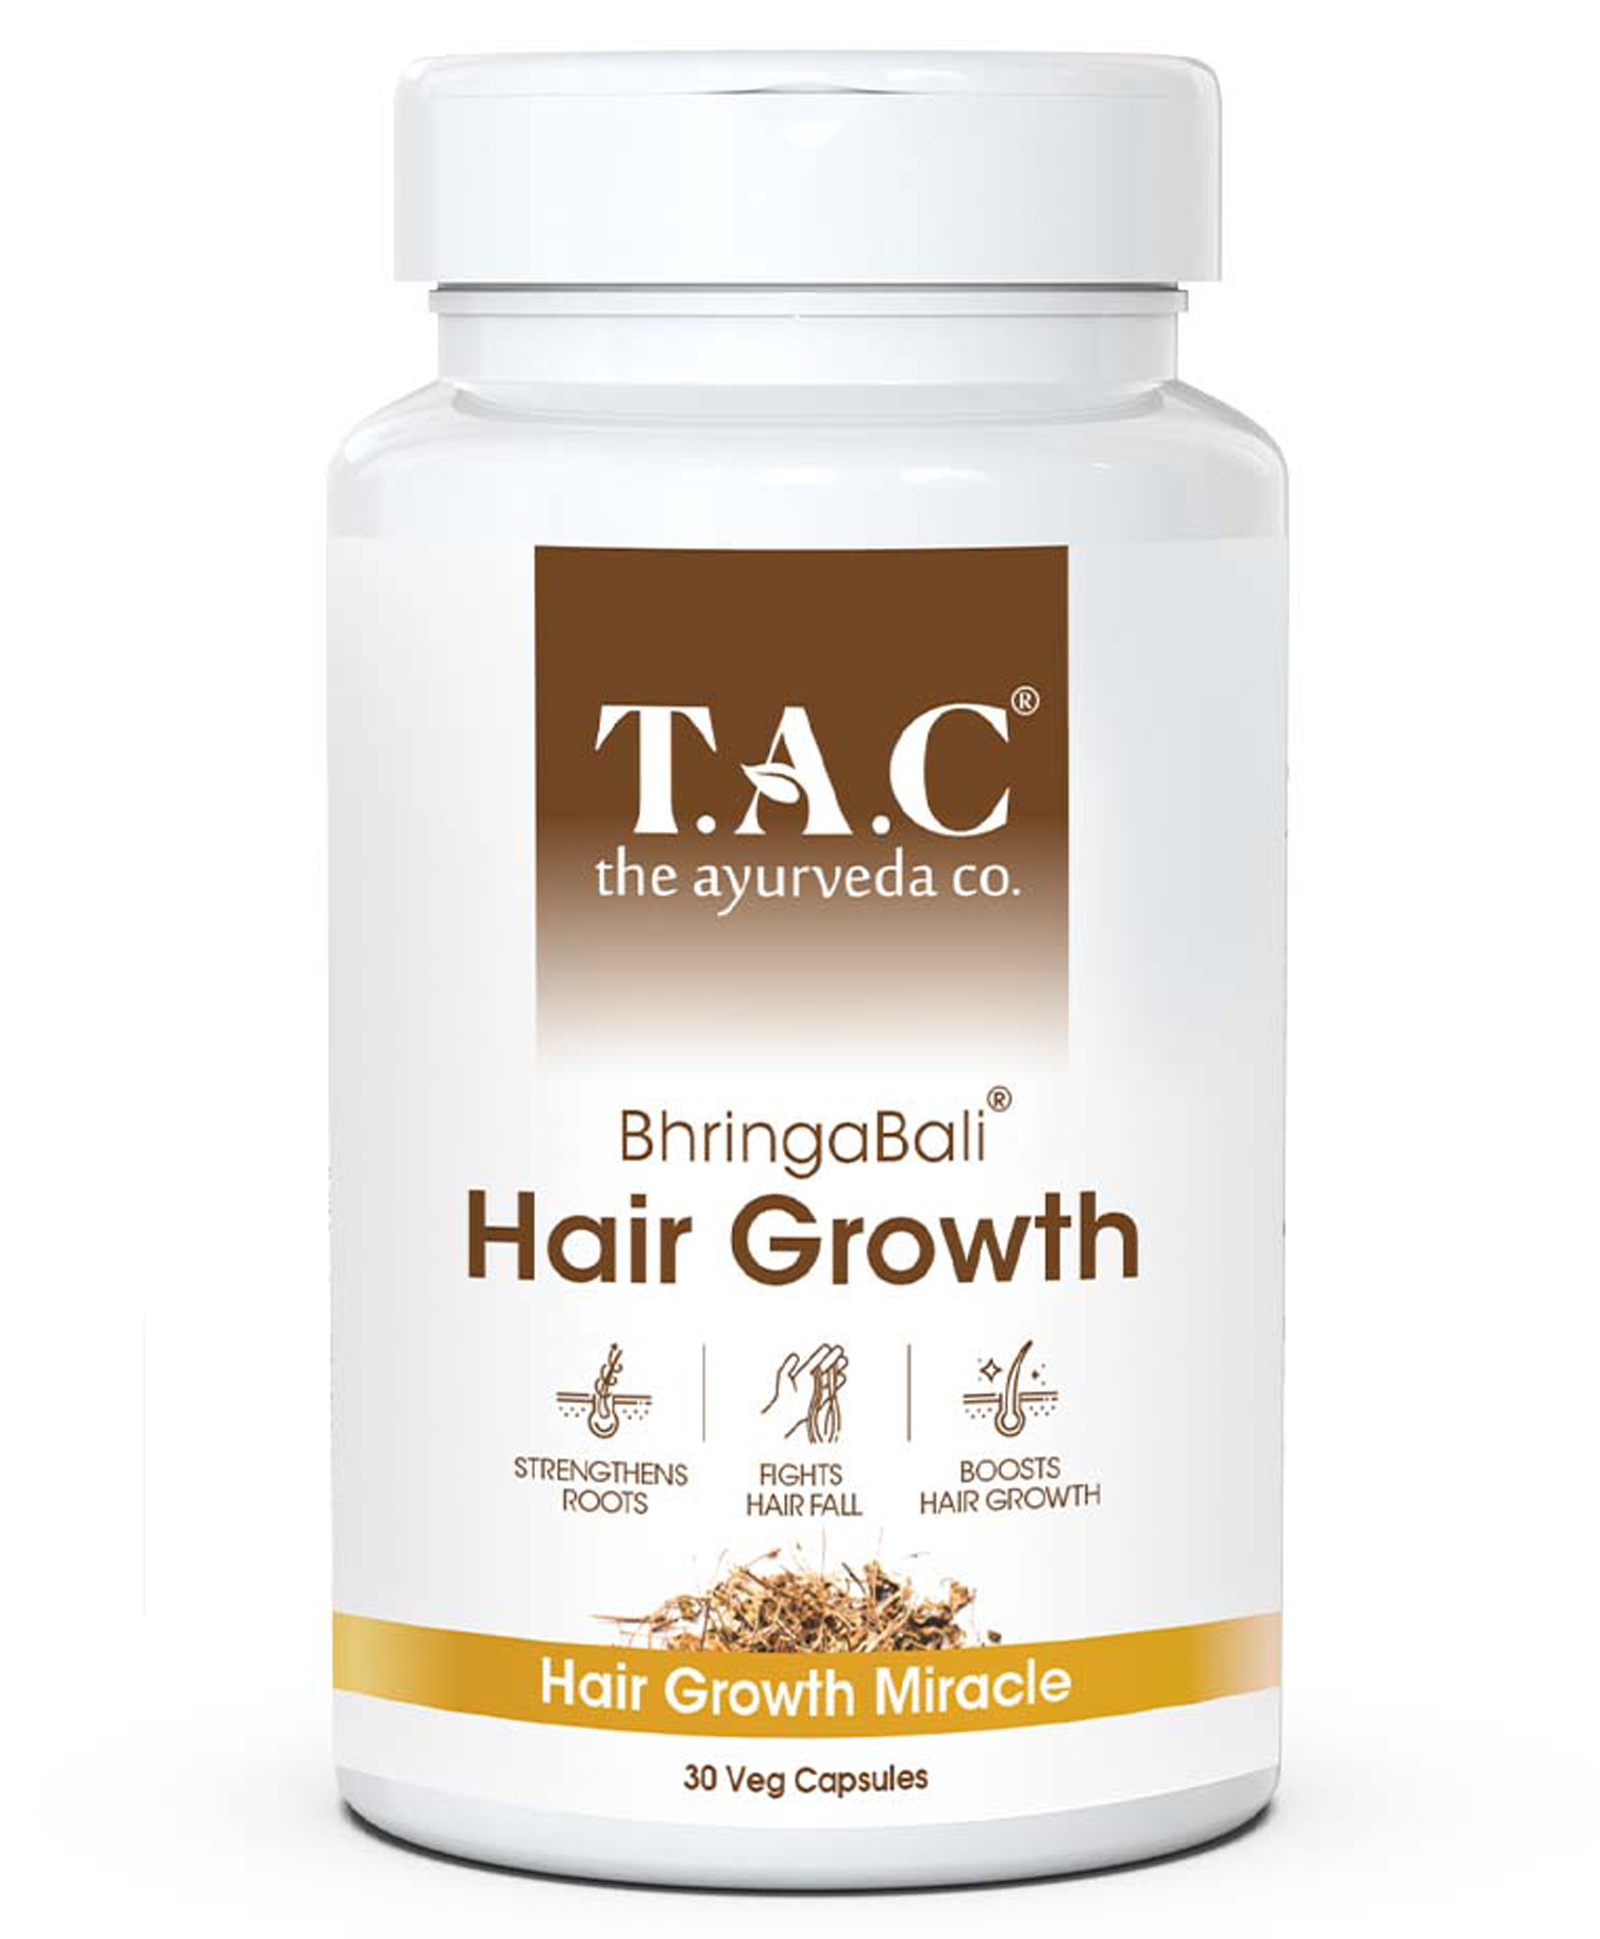 TAC The Ayurveda Co Bhringa Bali Hair Growth Capsules for Hair Growth  Miracle - 30 Capsules Online in India, Buy at Best Price from   - 12275477